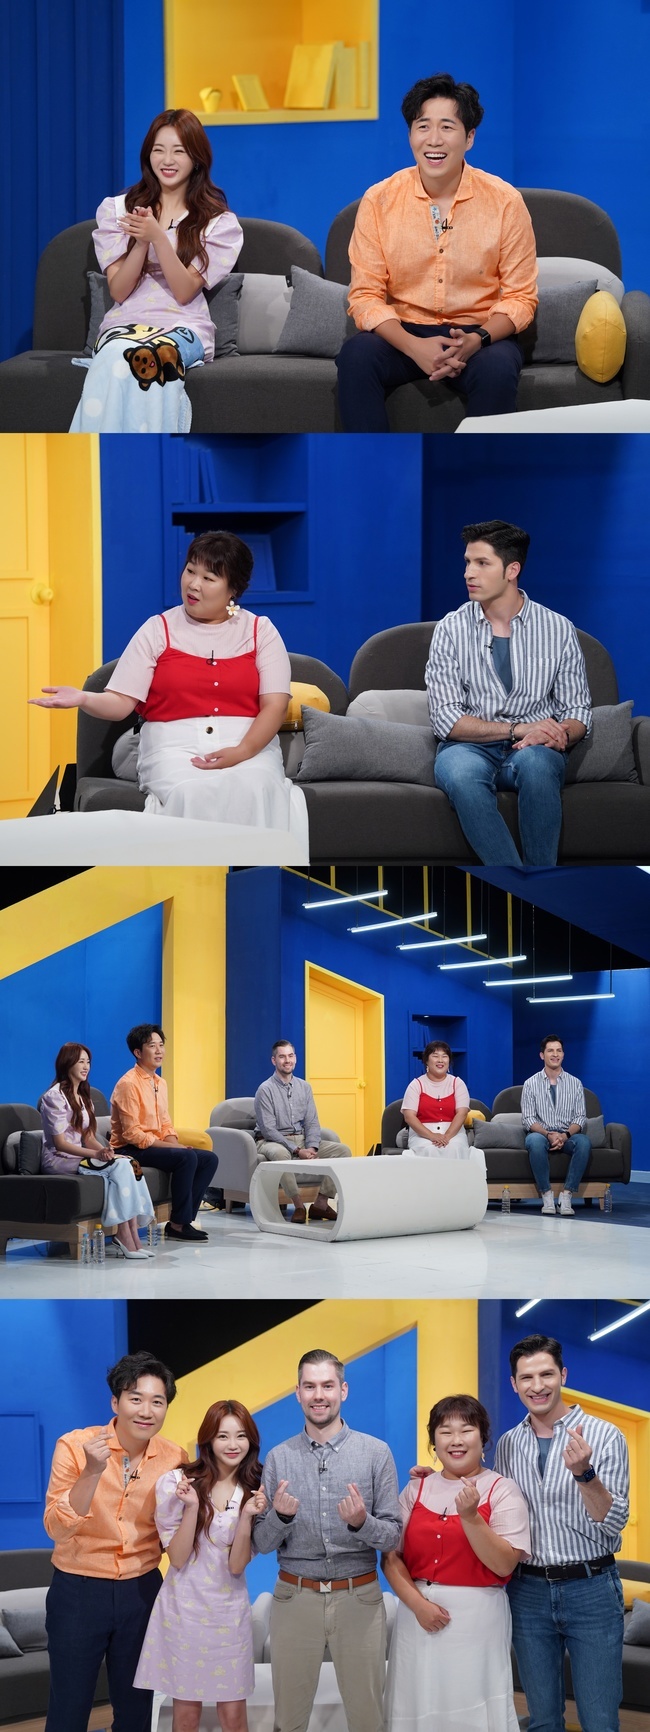 Do Kyoung-wan, Kim Min-kyung, Hong Ji-yoon and Alberto Fujimori predicted a unique chemistry.MBC Everlon Welcome, First Time in Korea?Korea is the first time, and on June 25, the first recording scene of the feature Bilfune Man in the Kitchen was released.Welcome, First Time in Korea, which will be broadcast on July 8th.Korea is the first time - Bilpune Man in the Kitchen (hereinafter referred to as Bilpune Man in the Kitchen) is a special broadcast depicting the journey of Finland Bilpu, Bille, Sami and Petri, who love Korean, to Korea.They will study the taste of Korean people in order to be reborn as a true Korean master and show Korean skill directly to Korean people.MC Do Kyoung-wan, Kim Min-kyung, Hong Ji-yoon, Alberto Fujimori and Finlands Petris laughter was released on the first recording scene.MCs and Petrie were immersed in the VCR video of the main characters of Bilfune Man in the Kitchen, and focused on recording without knowing how time goes by.It is the back door that the laughter did not stop in the studio in the appearance of pure Finland Friends who love Korean.The new MCs chemistry also raises expectations: Do Kyoung-wan showed stable progress and expressed expectations for the Finland Friends Korean expedition.Kim Min-kyung, who has a deep relationship with Bilpu, showed his empathy as a goddess of food. Hong Ji-yoon, the first MC challenge, showed his fanship about the Finland four-person group with a splashing reaction.It is the back door that MCs showed their breathing in a cheerful atmosphere despite the first breath.